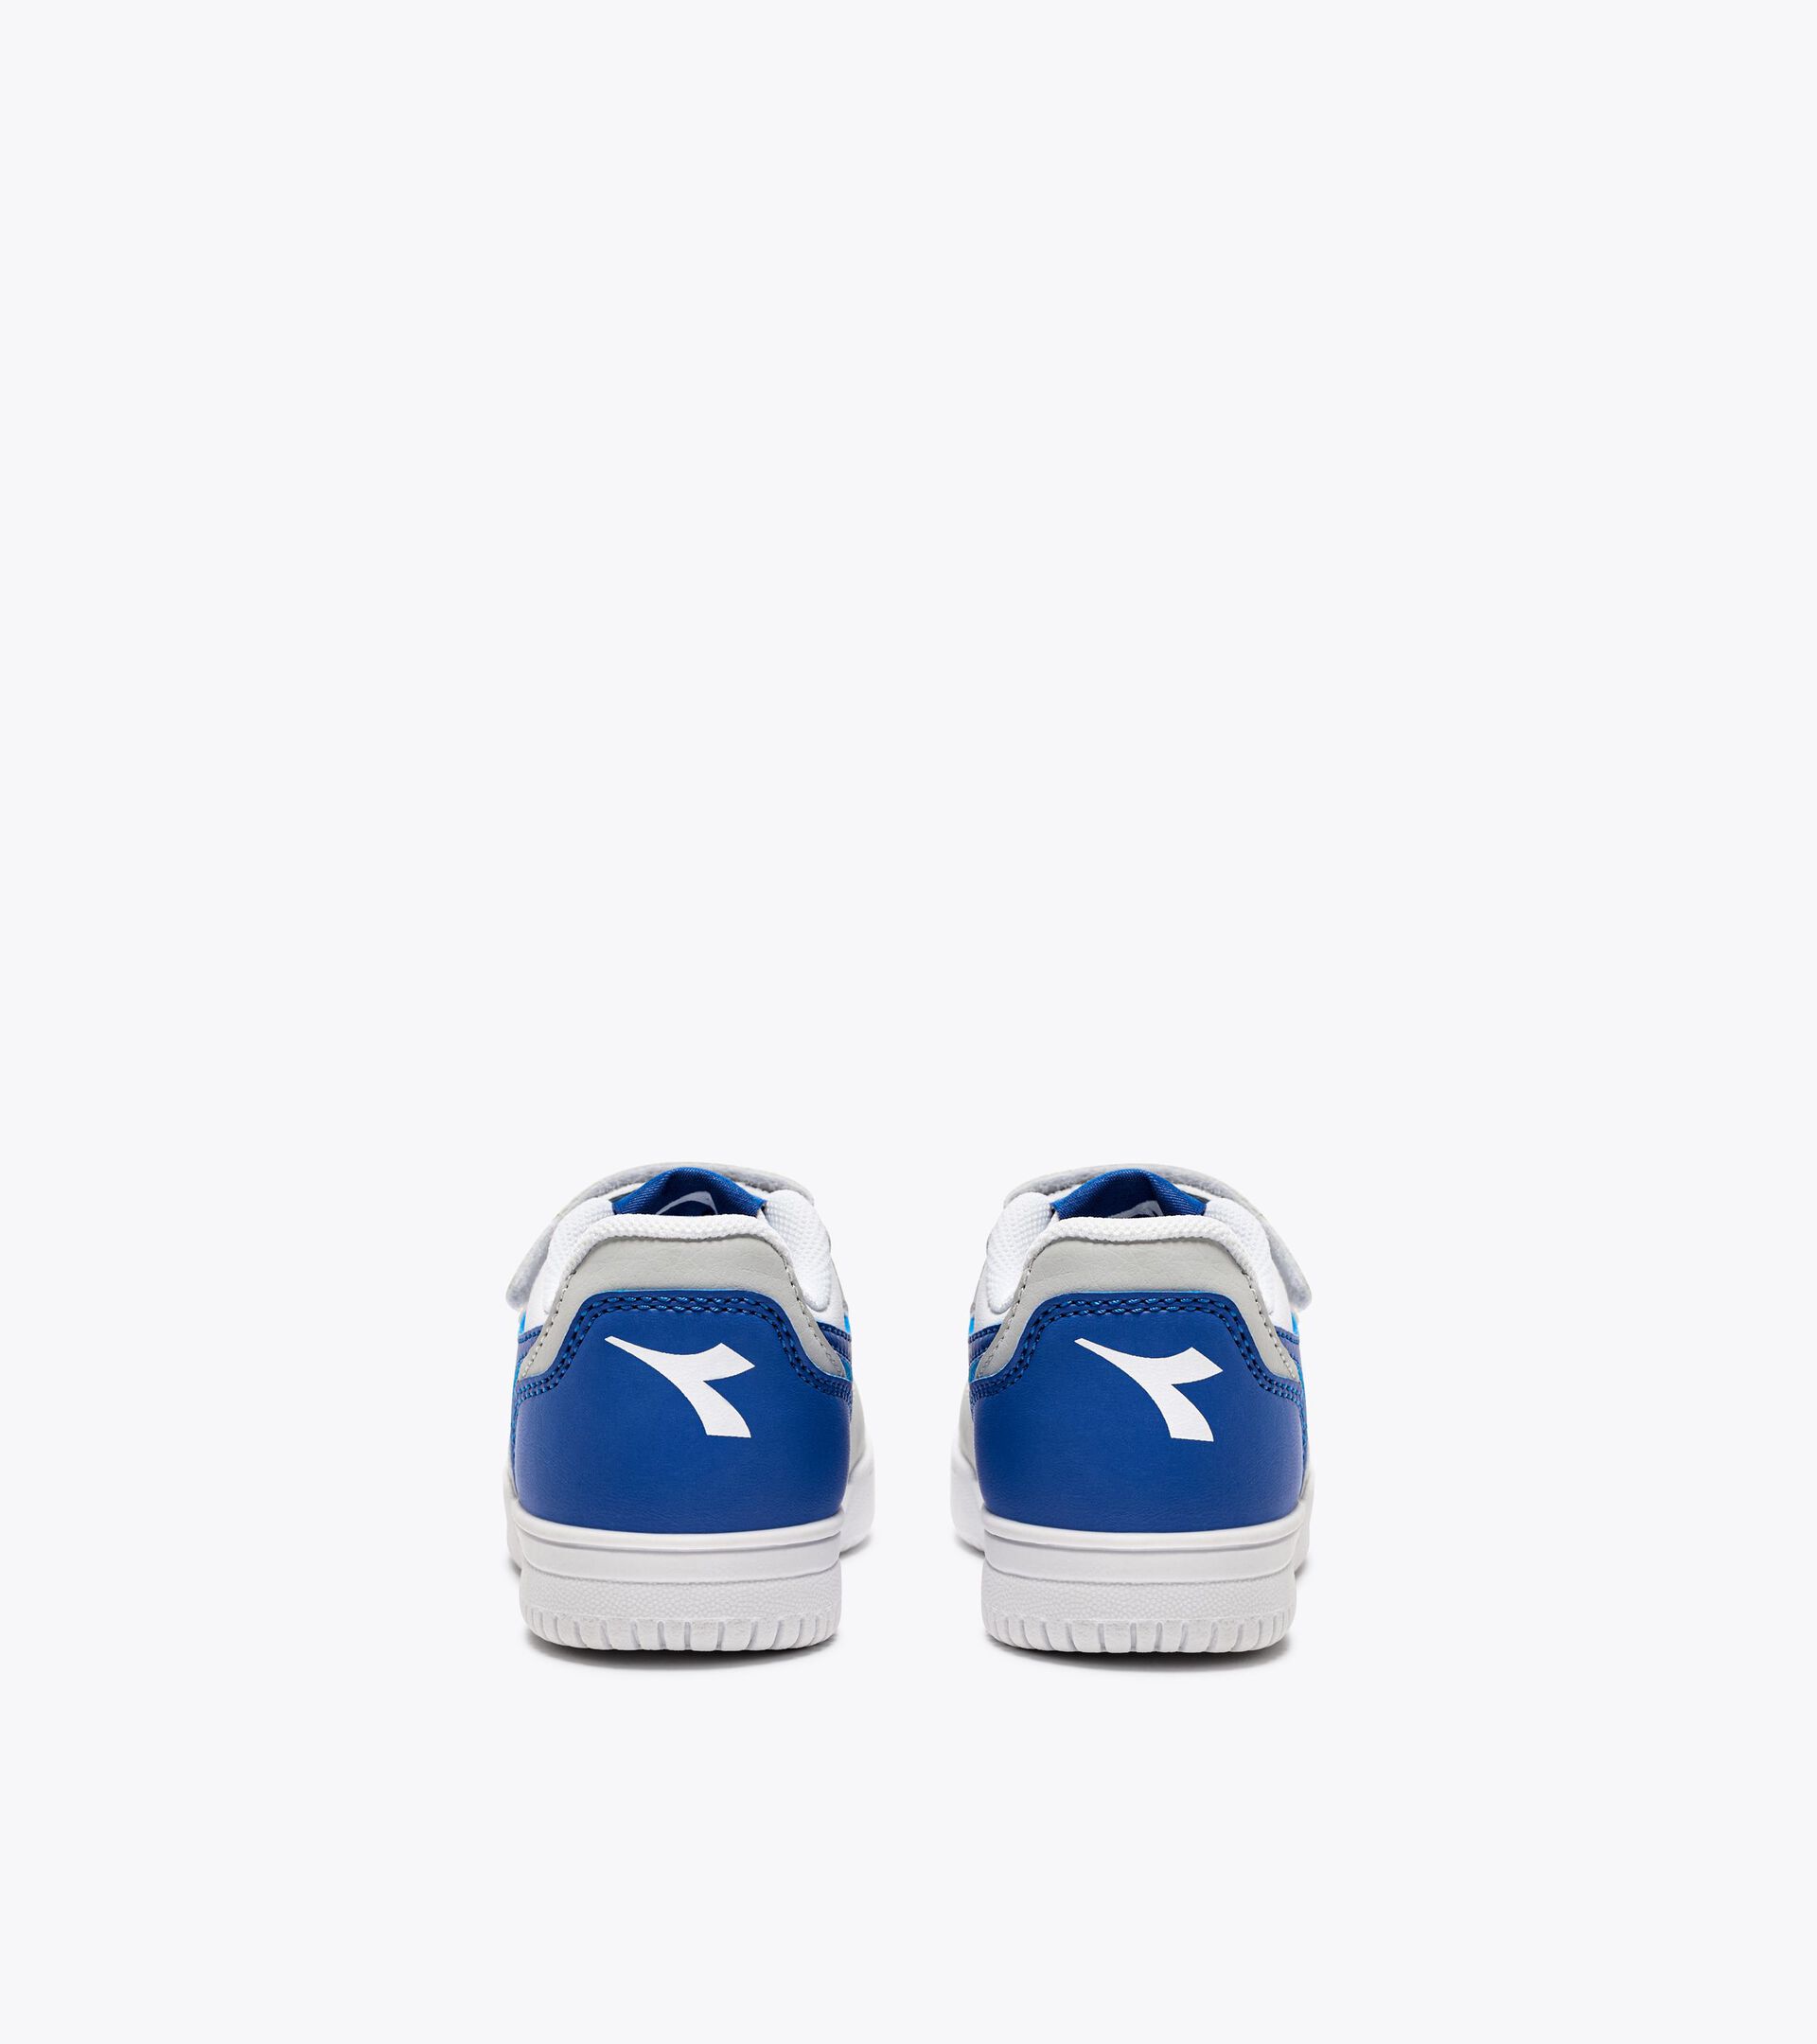 Sports shoes - Toddlers 1-4 years RAPTOR LOW TD DAWN BLUE/DAZZLING BLUE - Diadora